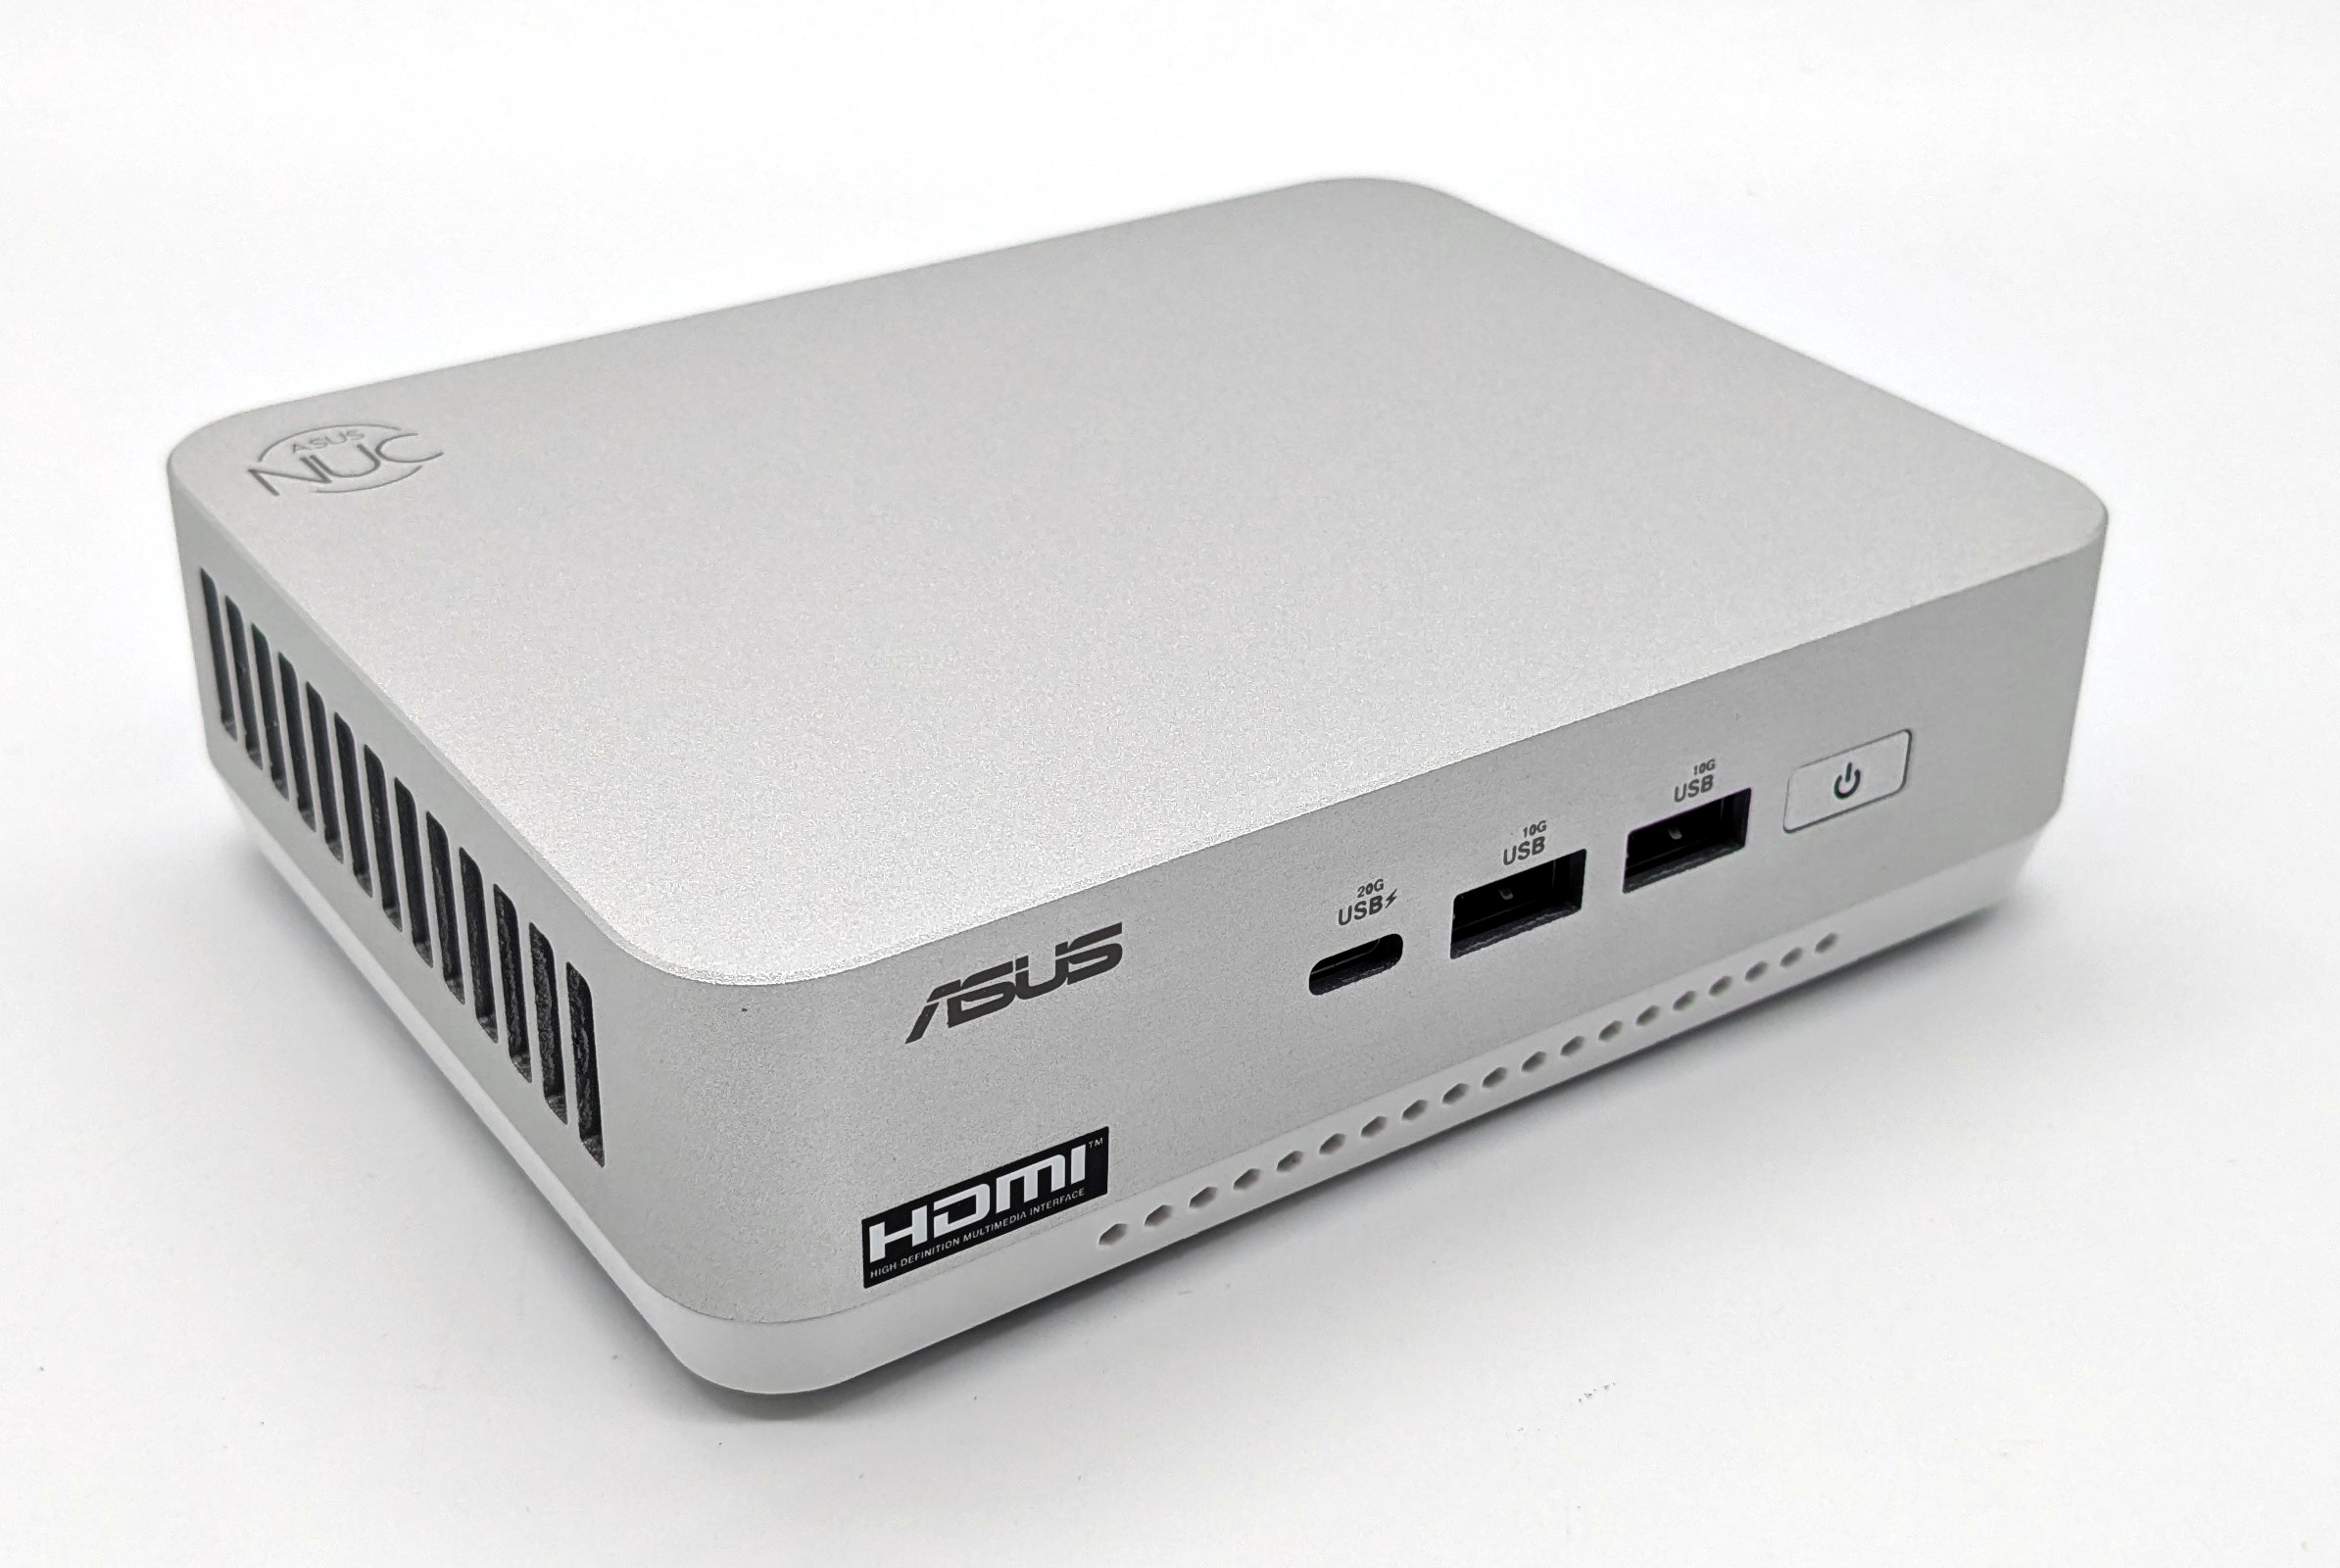 Asus NUC 14 Pro Mini PC review - The original comes back stronger than ever with a U9-185H